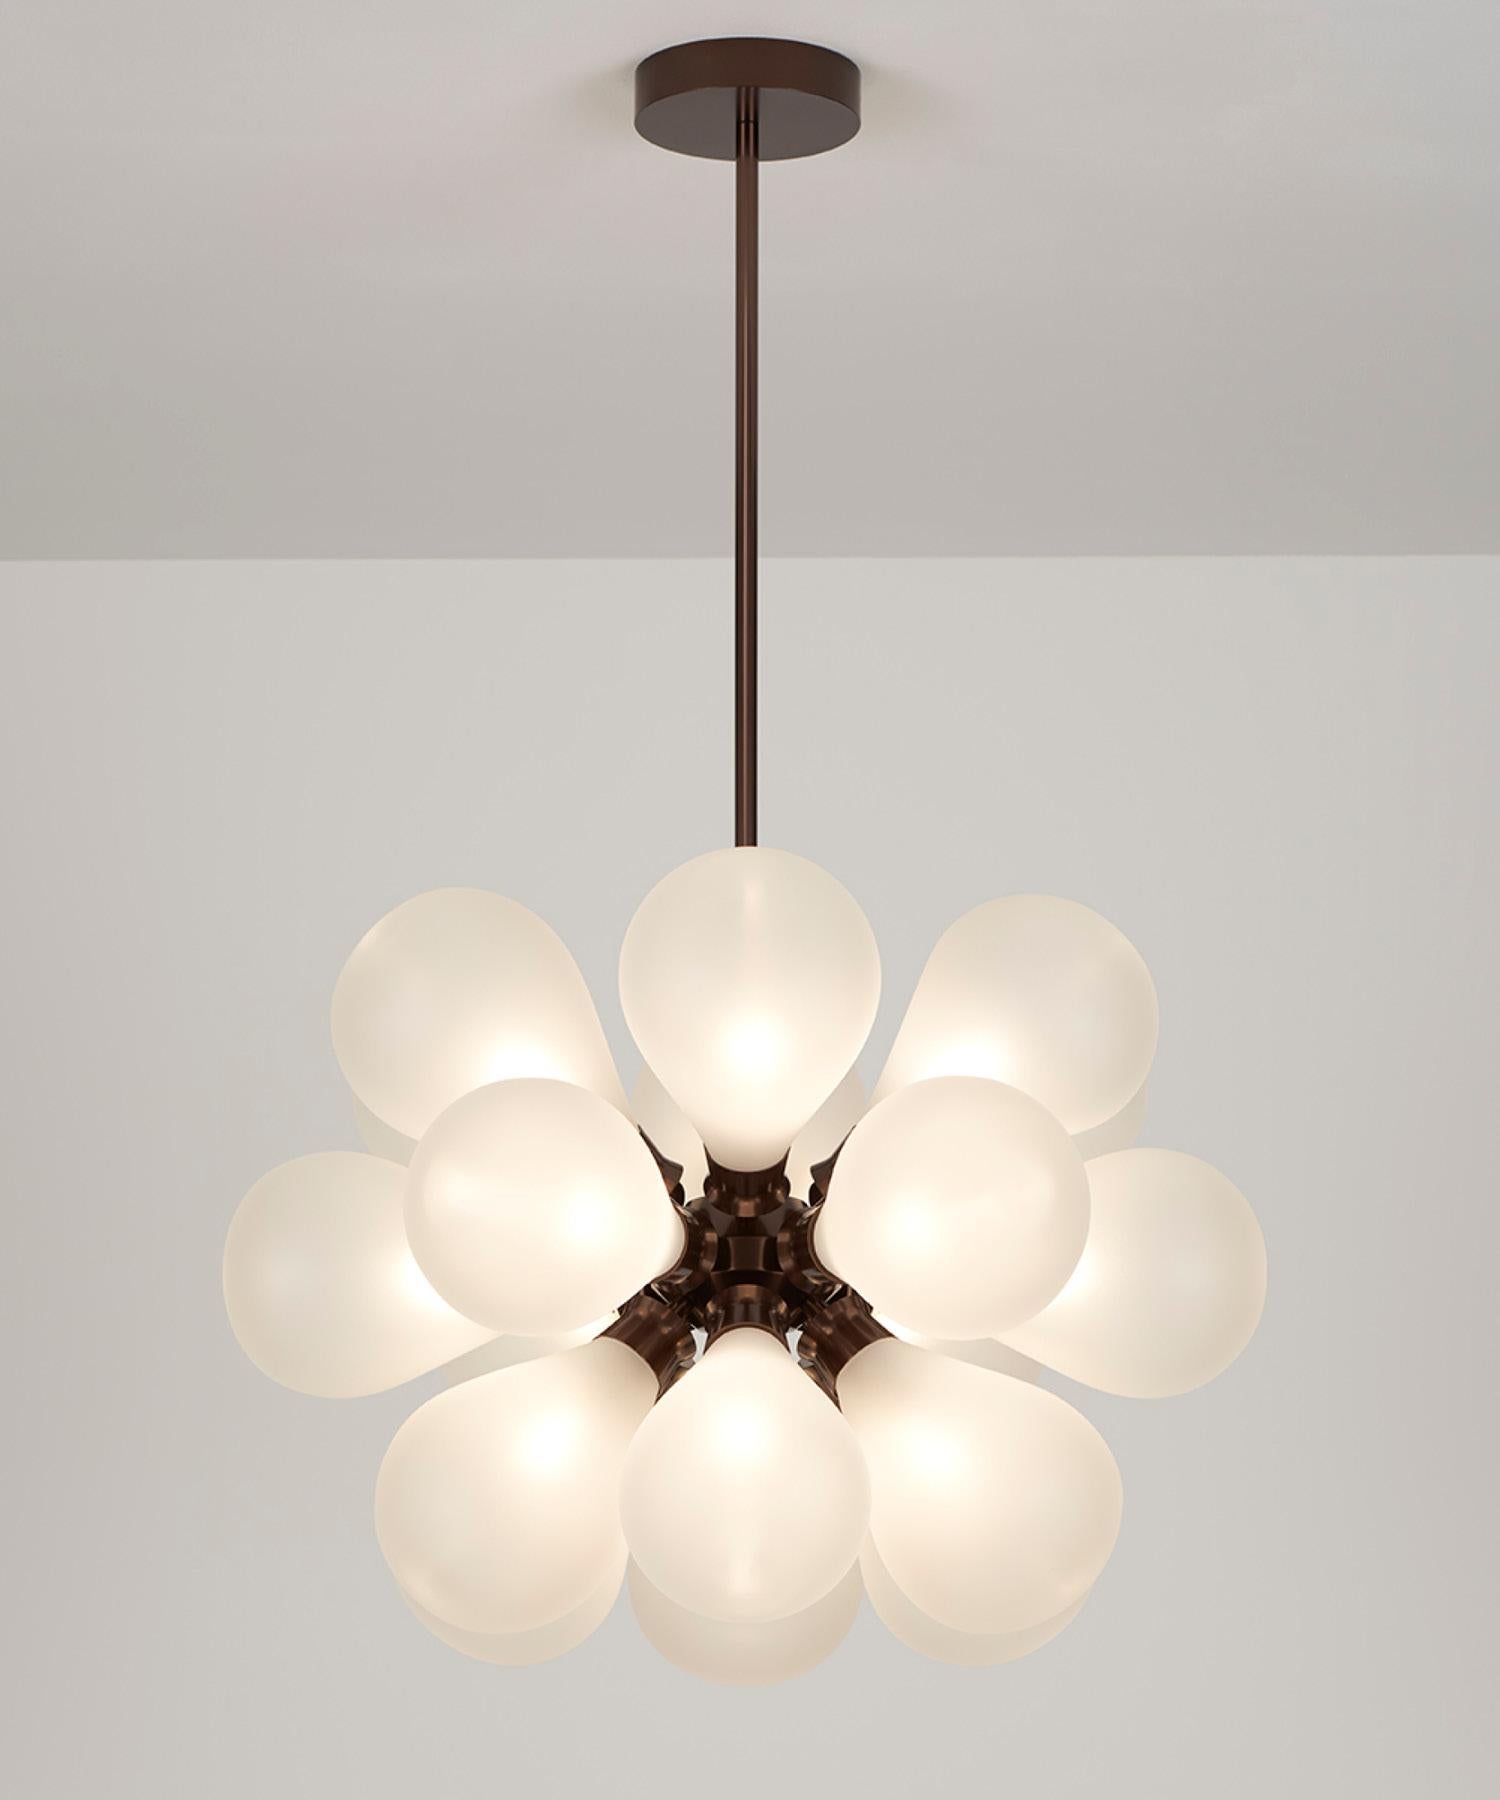 British Cintola Maxi Pendant in Satin Bronze with 18 Handblown Frosted Glass Globes For Sale